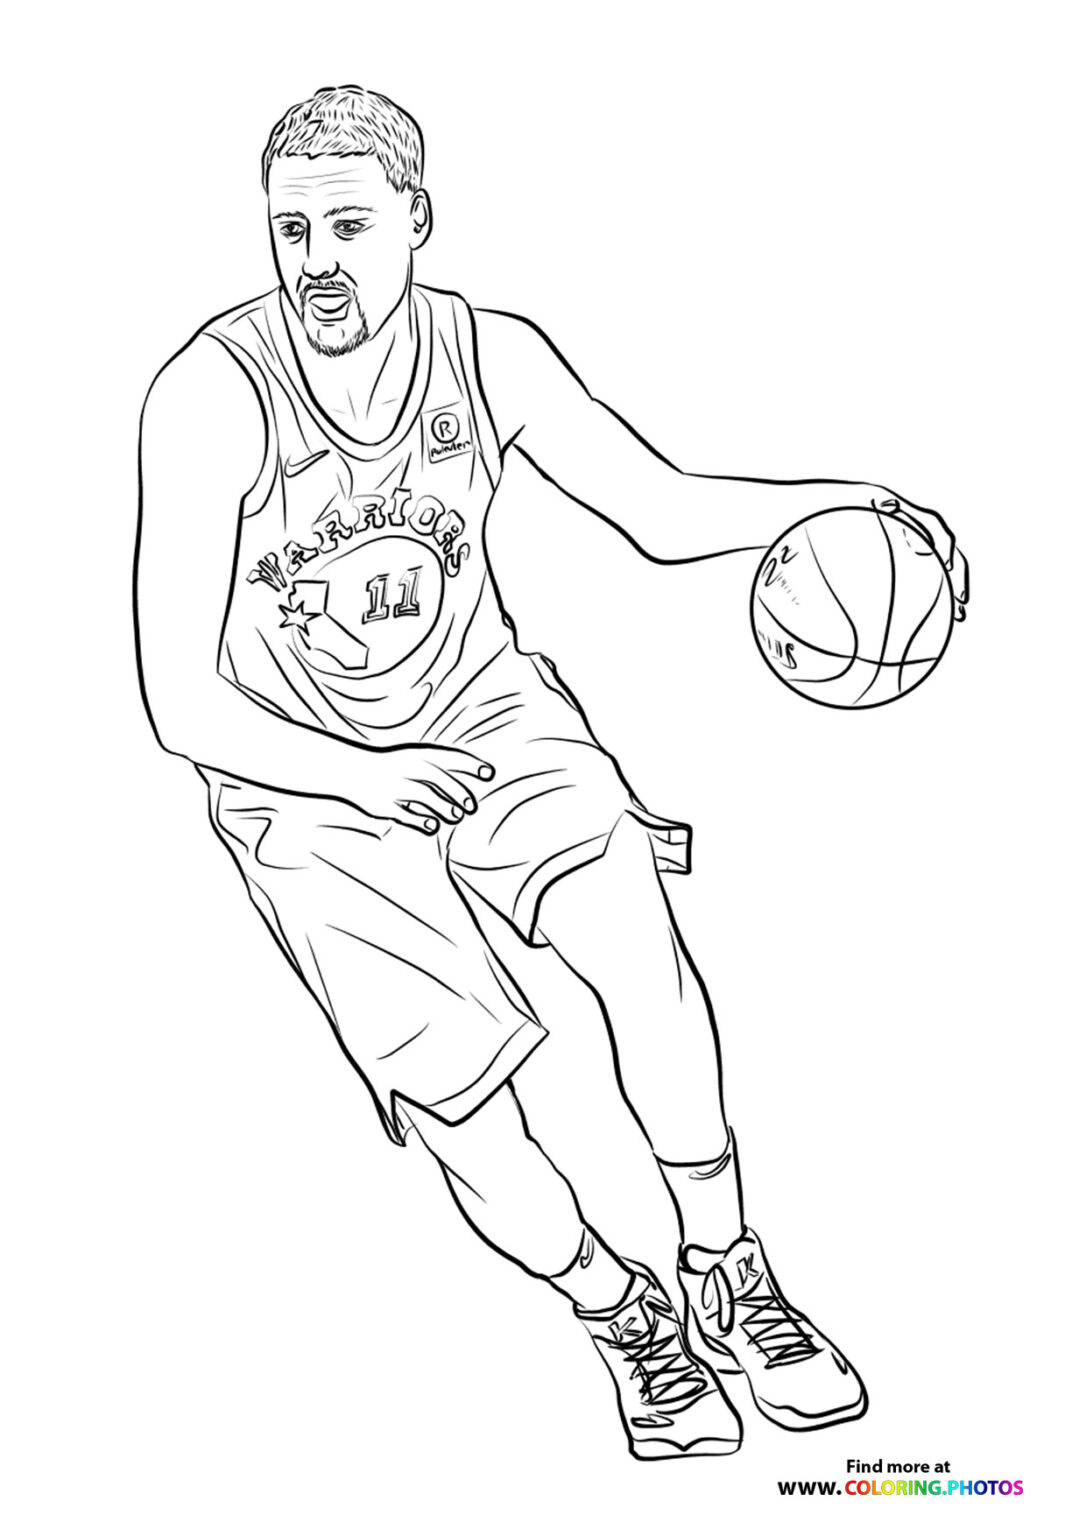 klay thompson dribling - Coloring Pages for kids